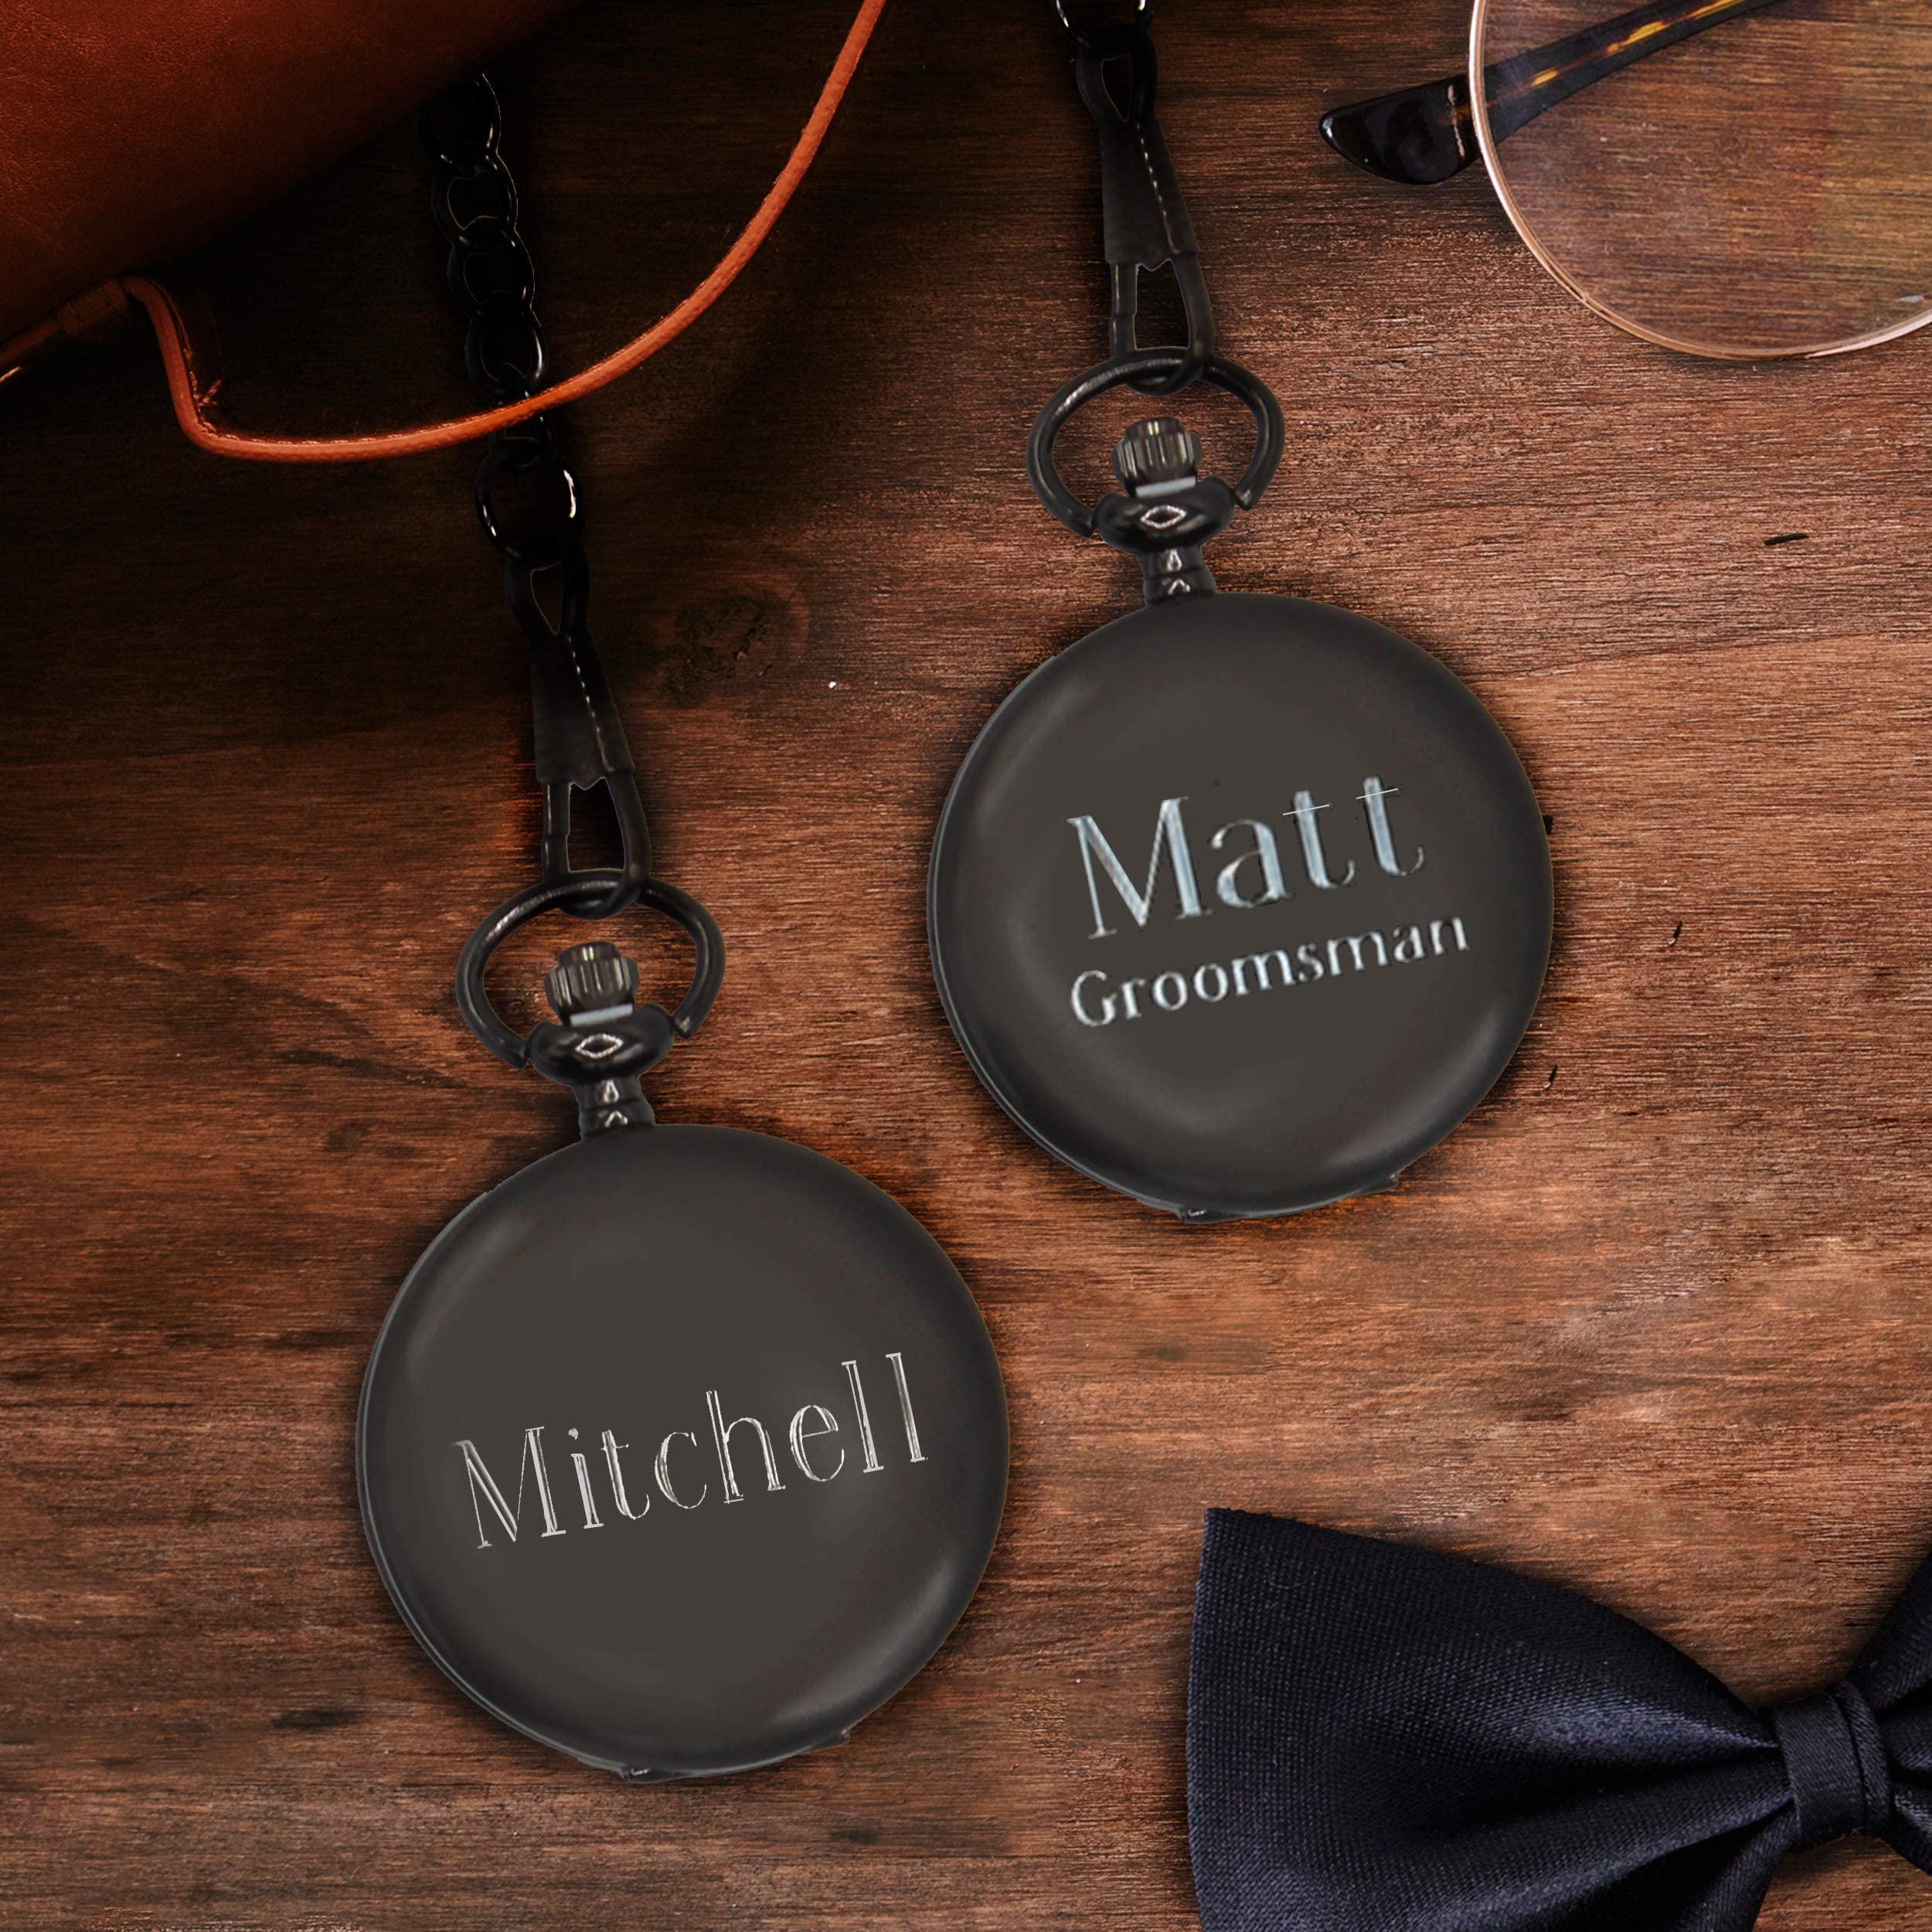 My Personal Memories, Personalized Gunmetal Quartz Pocket Watch with Chain - Groomsmen Wedding Party - Engraved